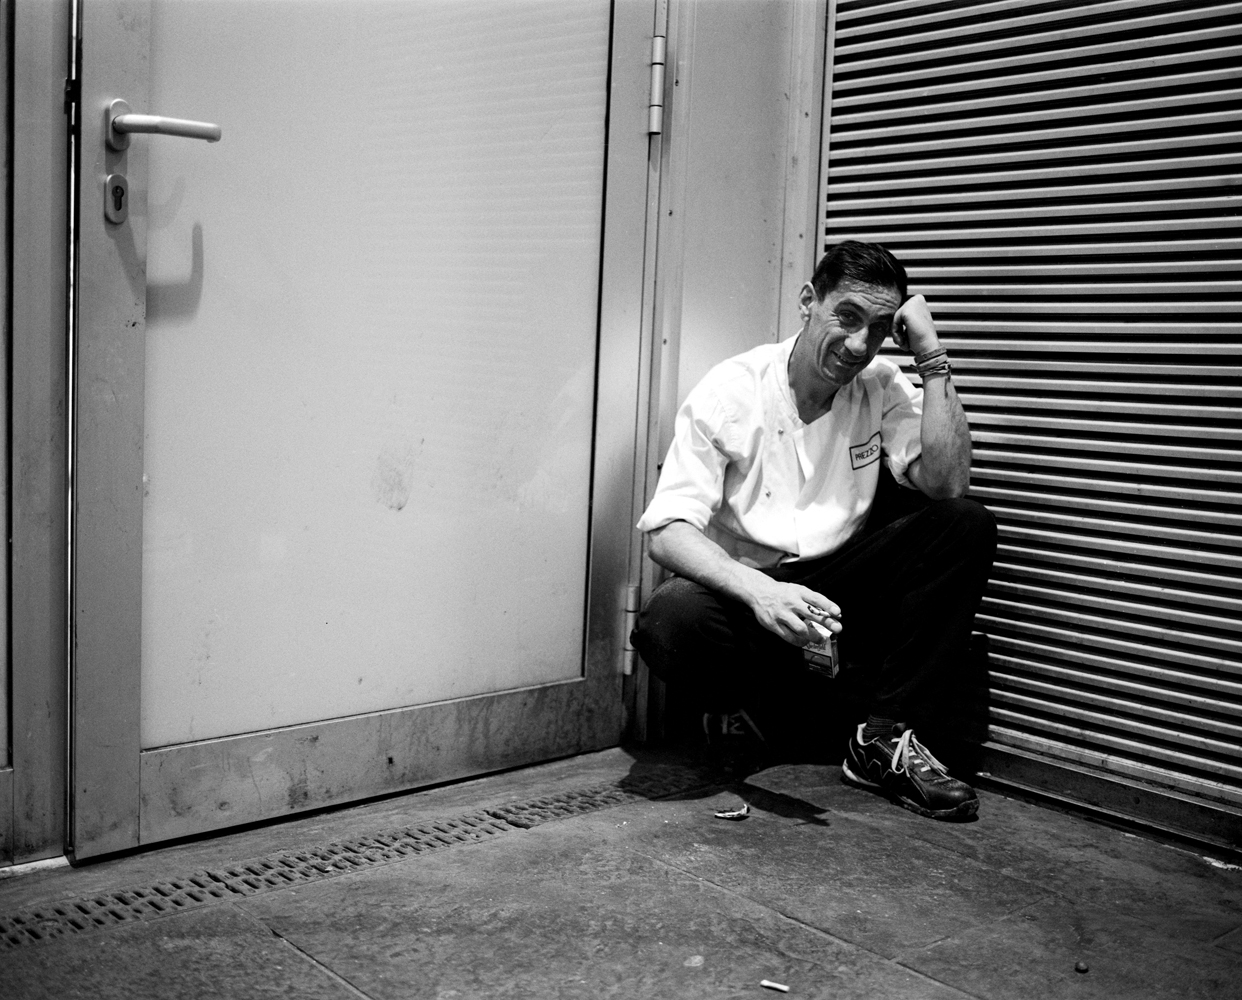 a man sitting on the ground in front of doors